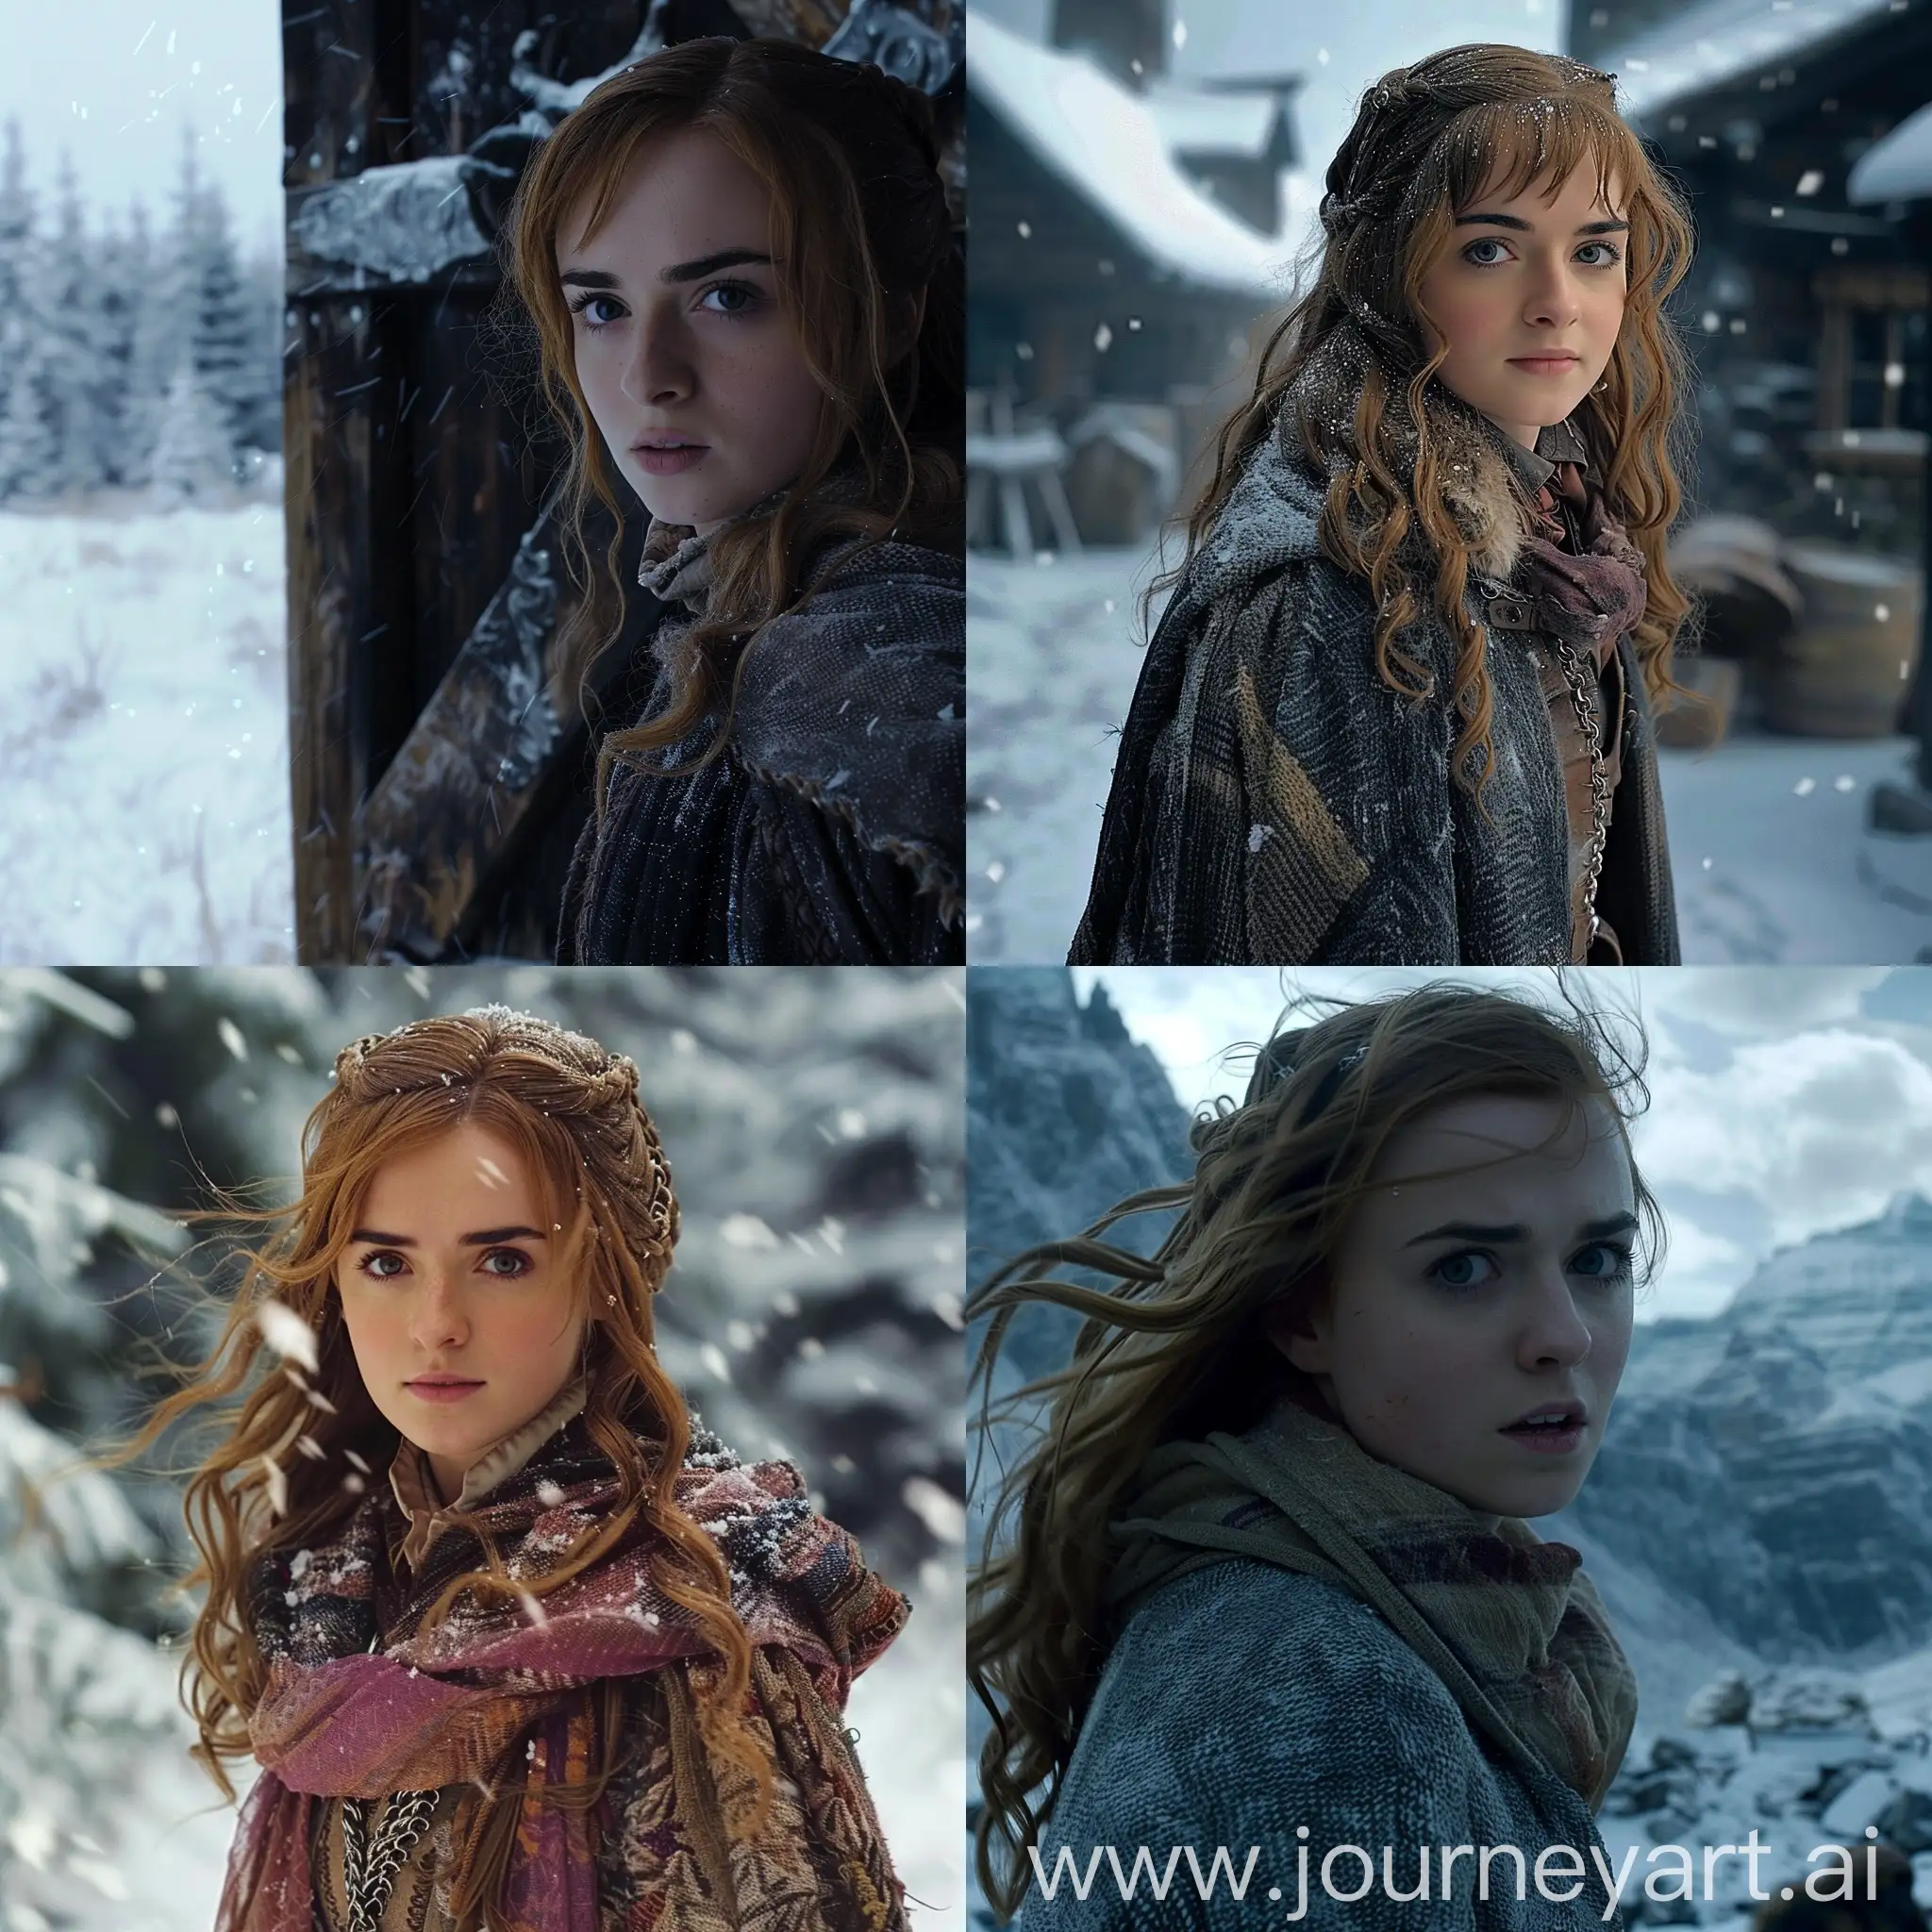 Hermione-Granger-in-Game-of-Thrones-at-Winterfell